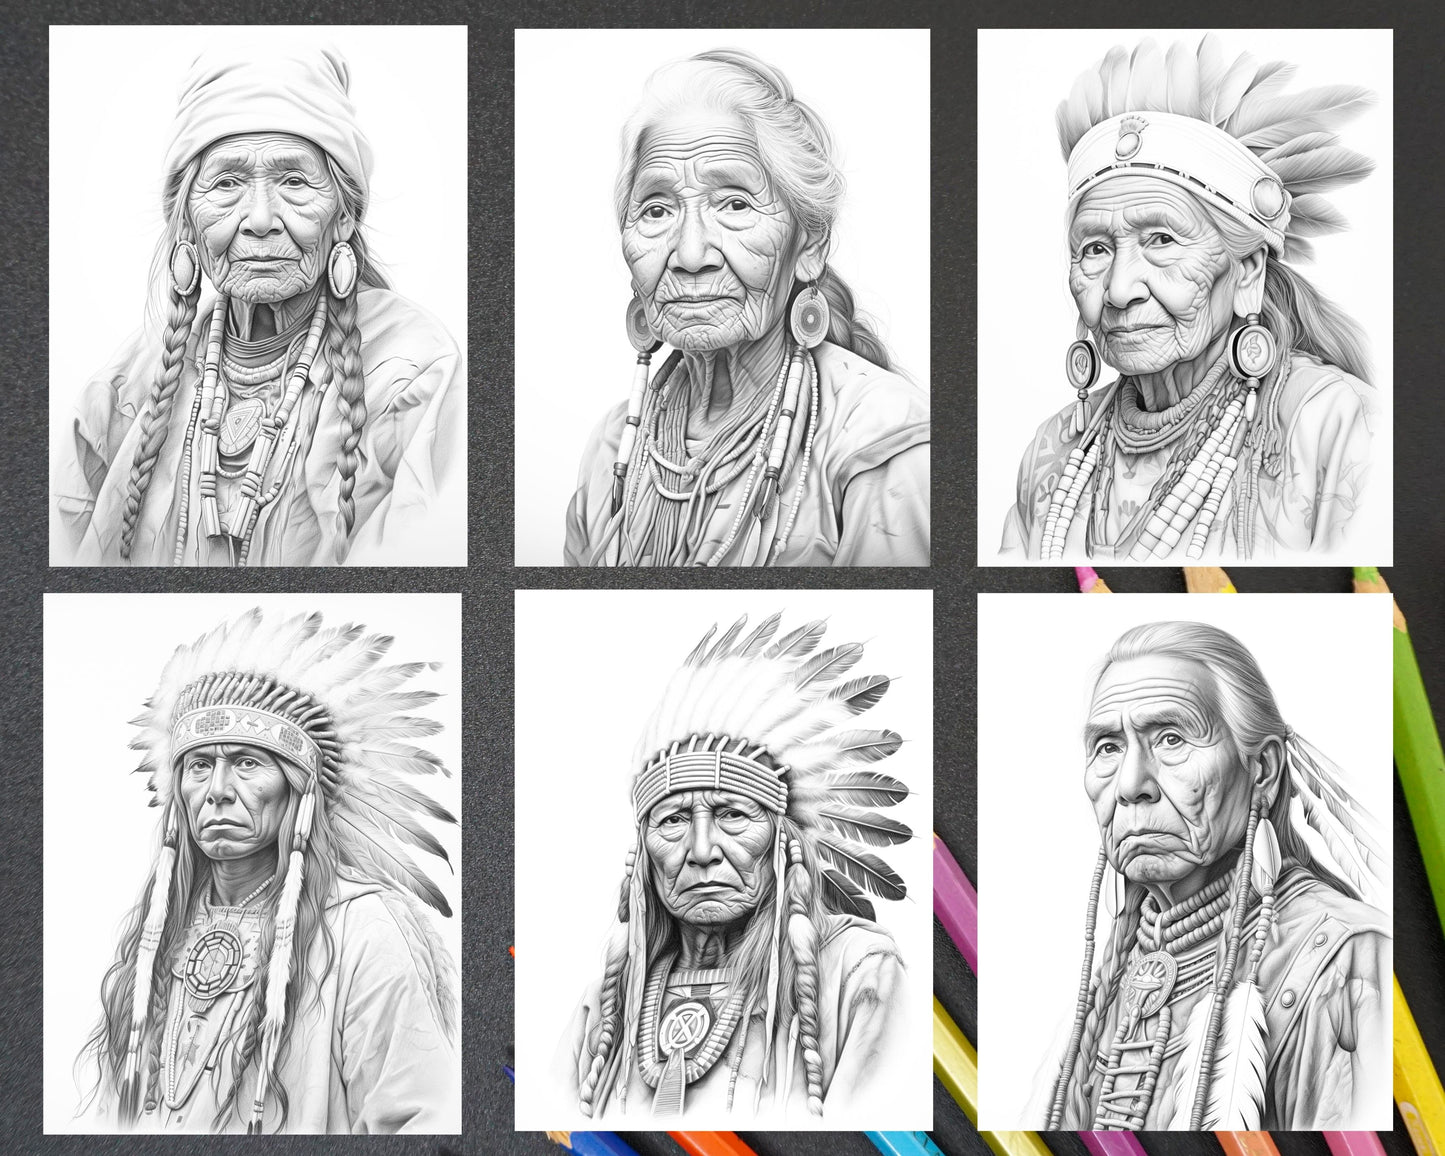 Native American Portrait Coloring Page, Printable Grayscale Coloring Art, Adult Coloring Download, Native American Ethnic Art, Intricate Portrait Illustration